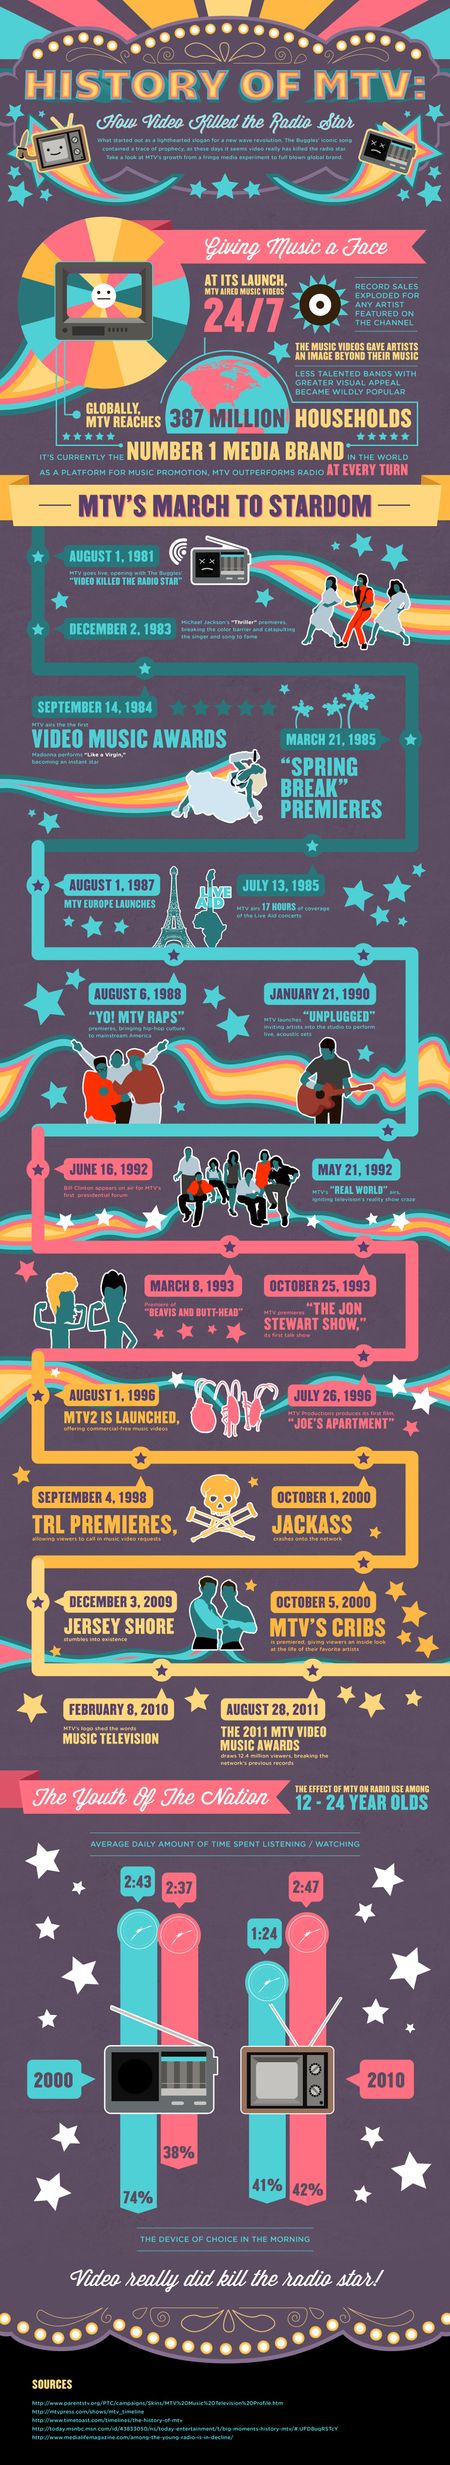 history of MTV infographic